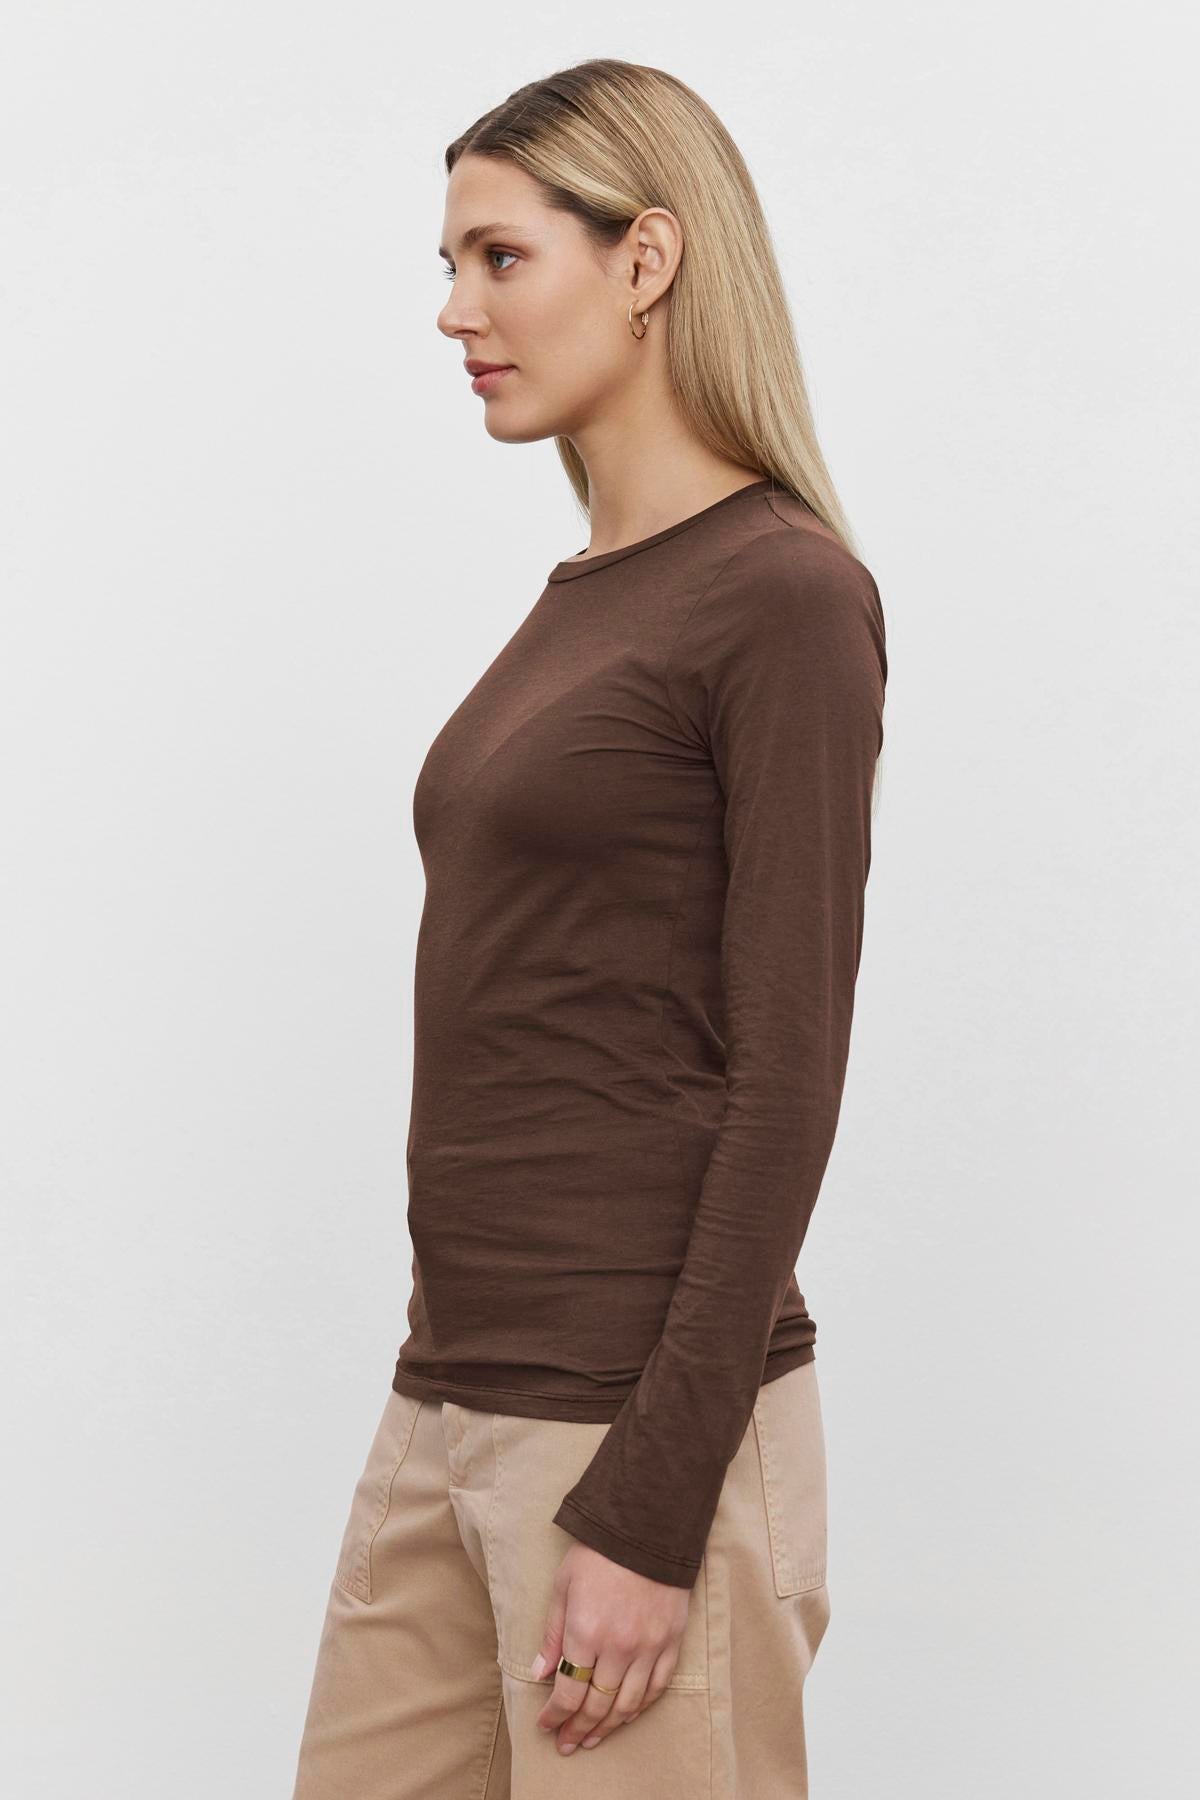 A person with long, light hair is wearing a Velvet by Graham & Spencer ZOFINA TEE and beige pants, standing in profile against a plain white background.-37648688283841